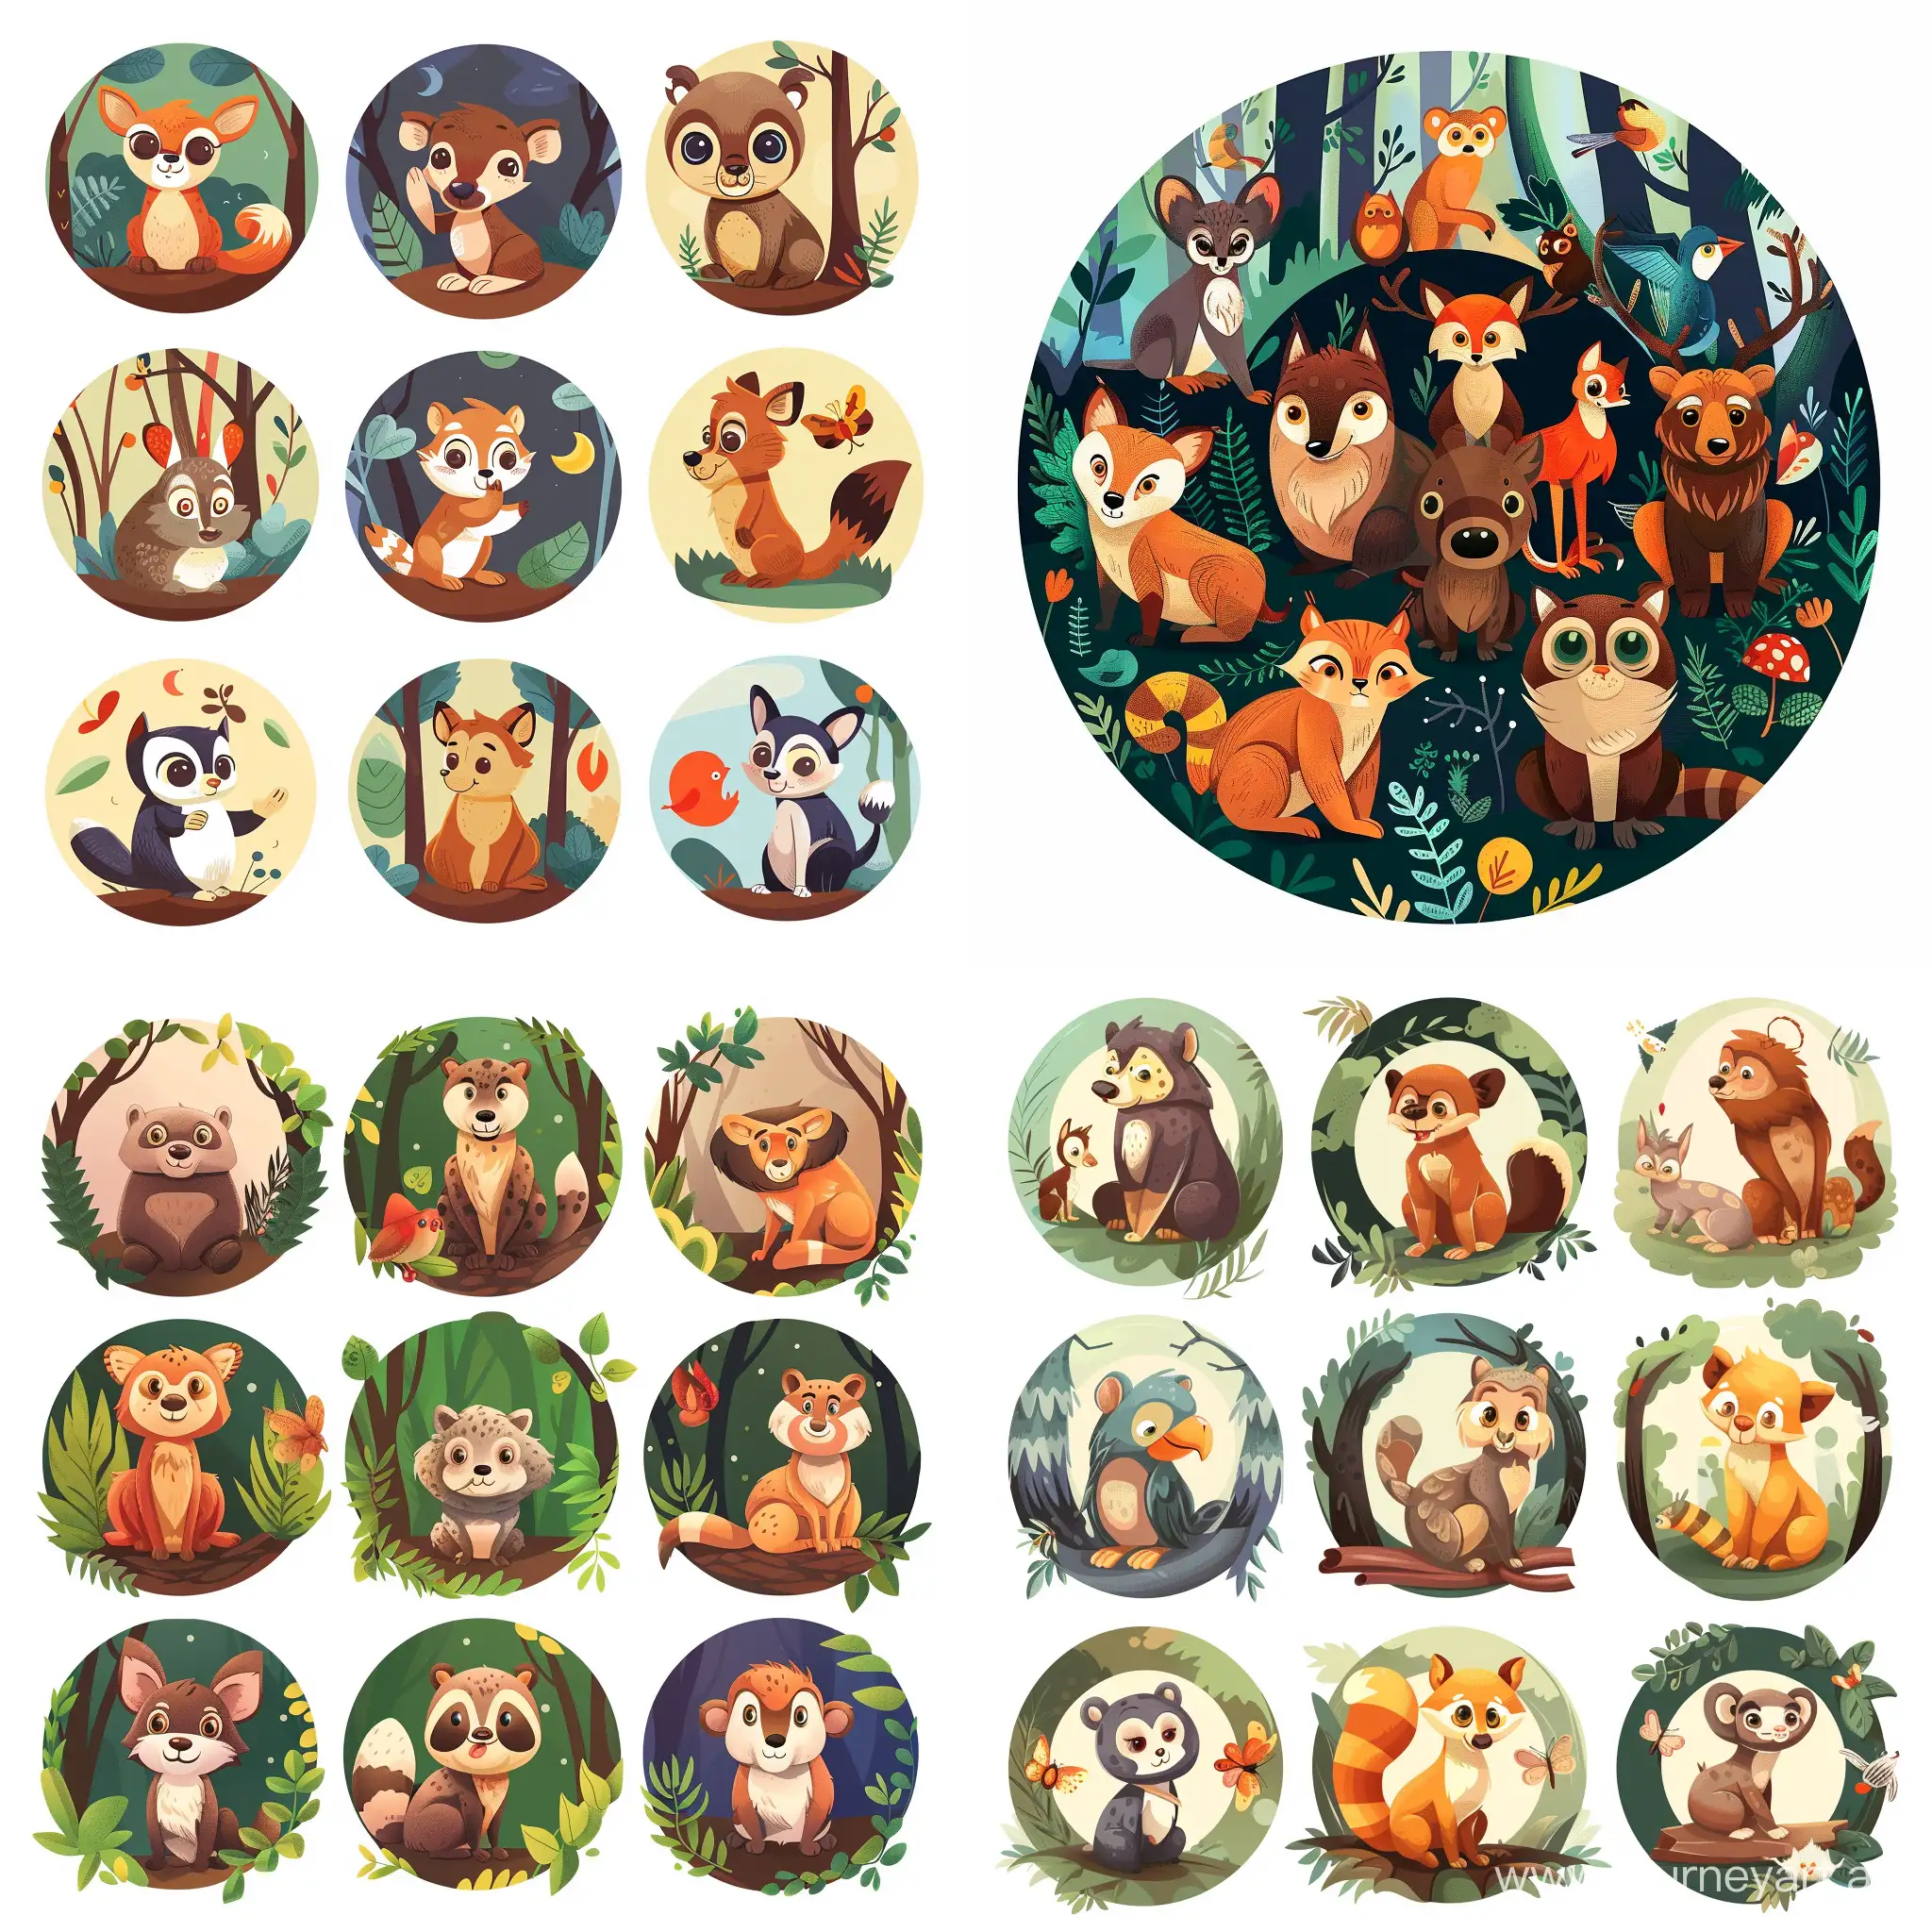 cartoon forest animals, wild animals illustration, in the style of circular shapes, matt bors, high resolution, alena aenami, charles wysocki, colorful animation stills, use of earth tones, high quality details